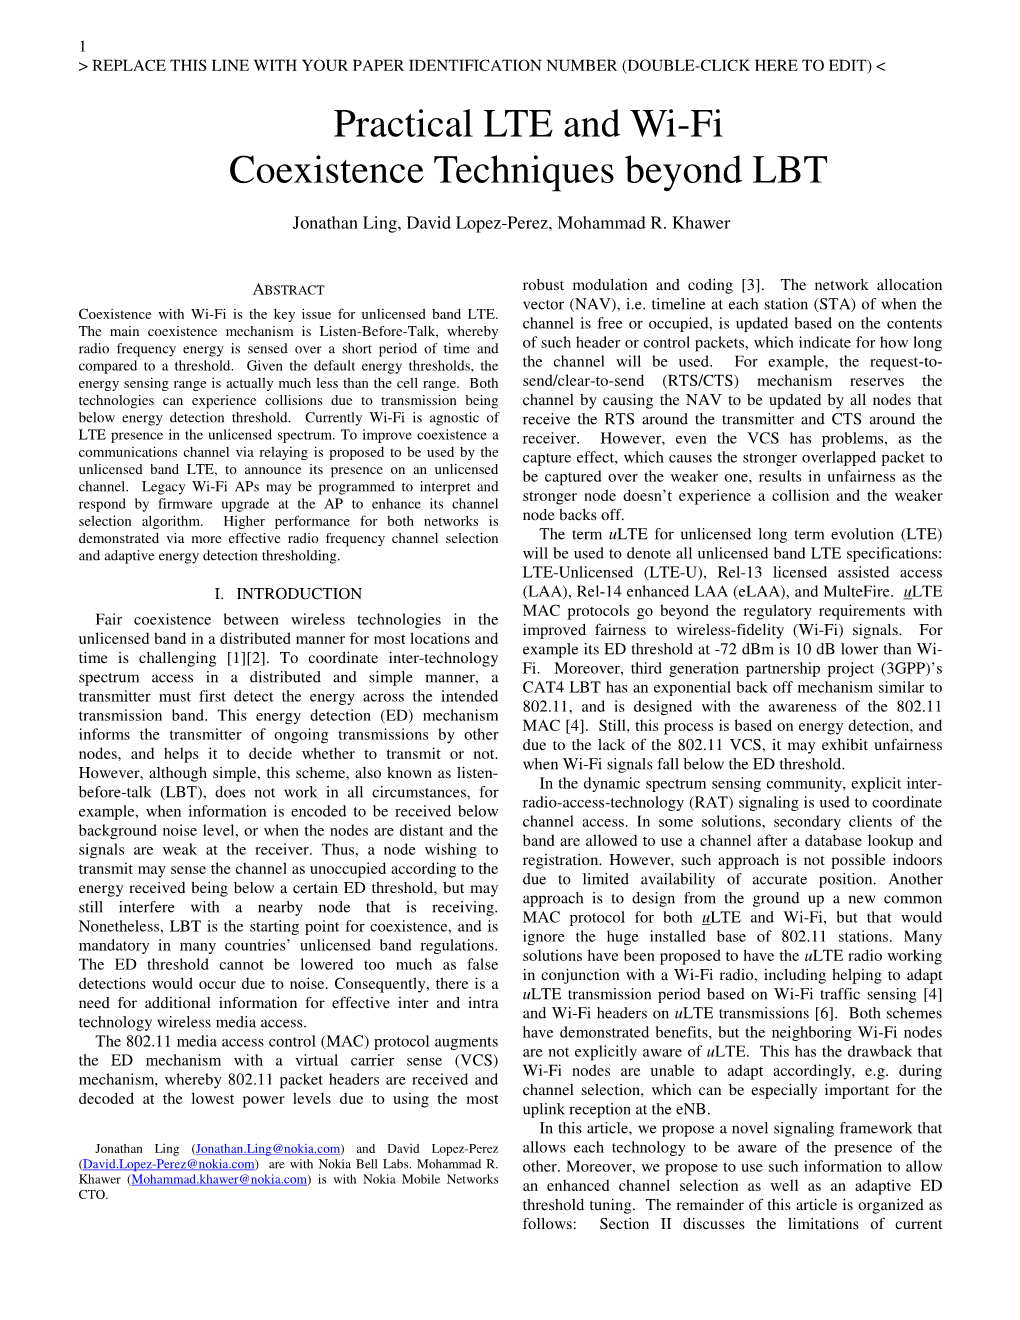 Practical LTE and Wi-Fi Coexistence Techniques Beyond LBT